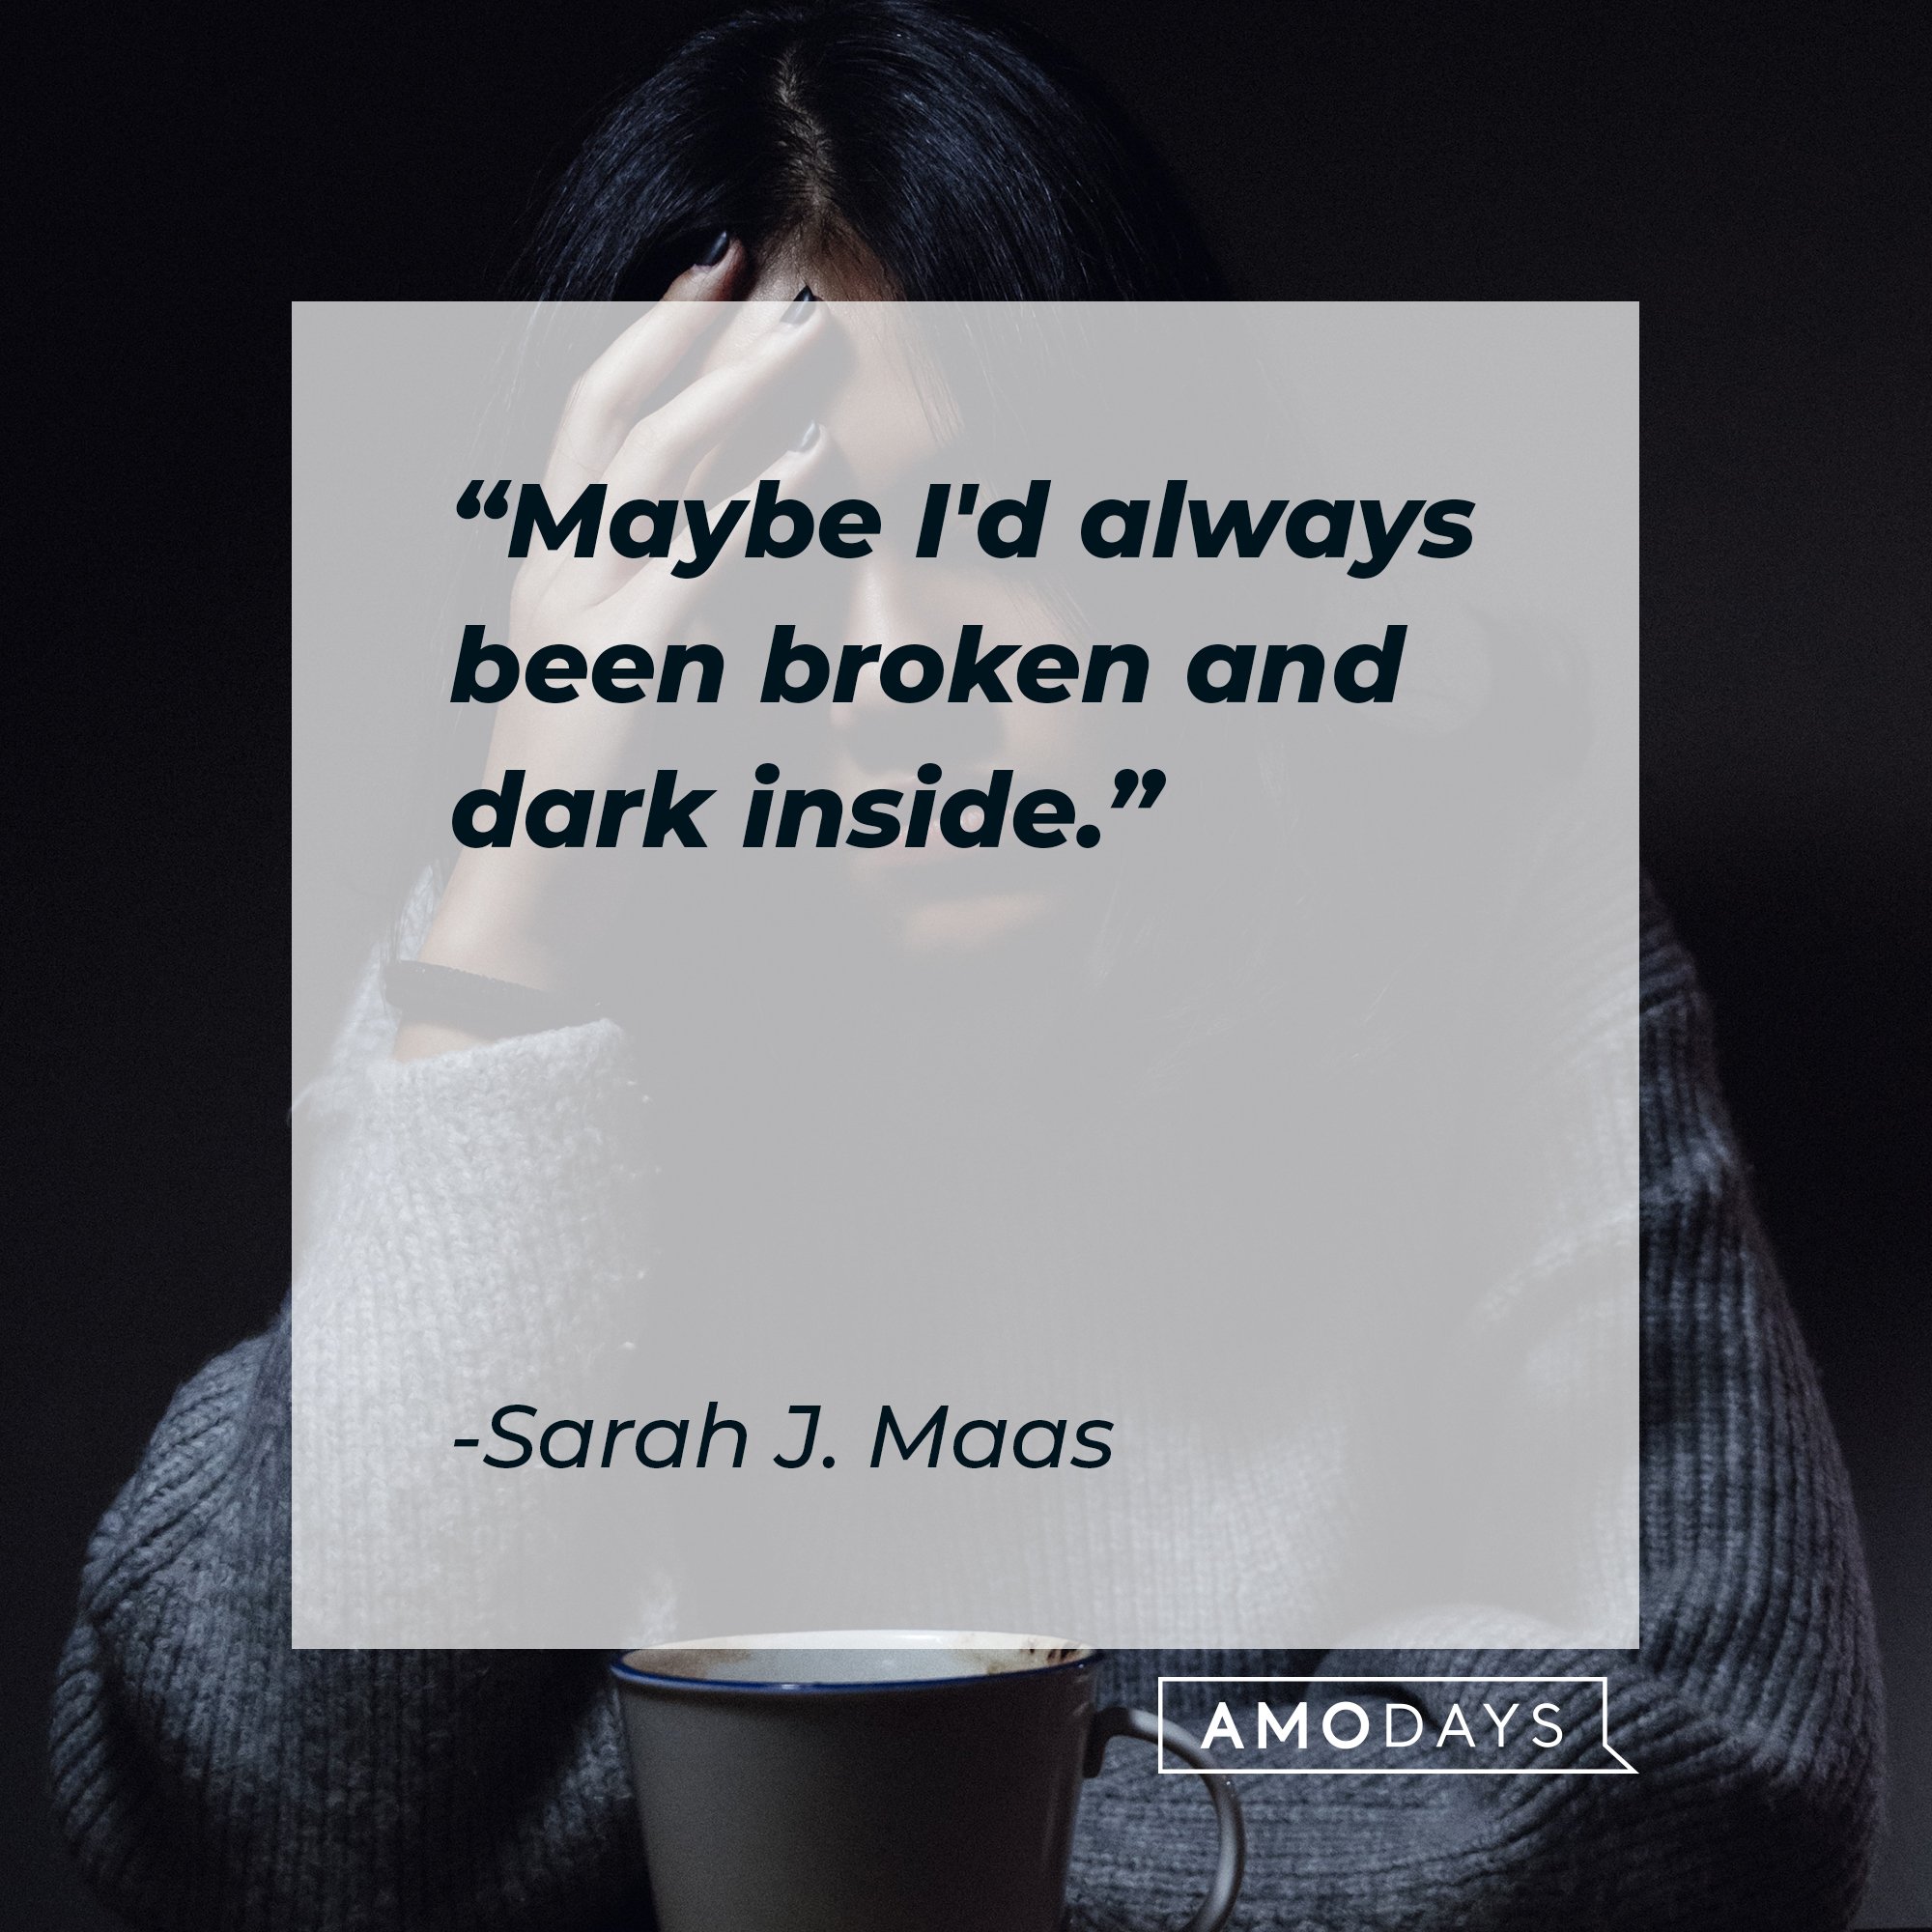 Sarah J. Maas' quote: "Maybe I'd always been broken and dark inside." | Image: AmoDays